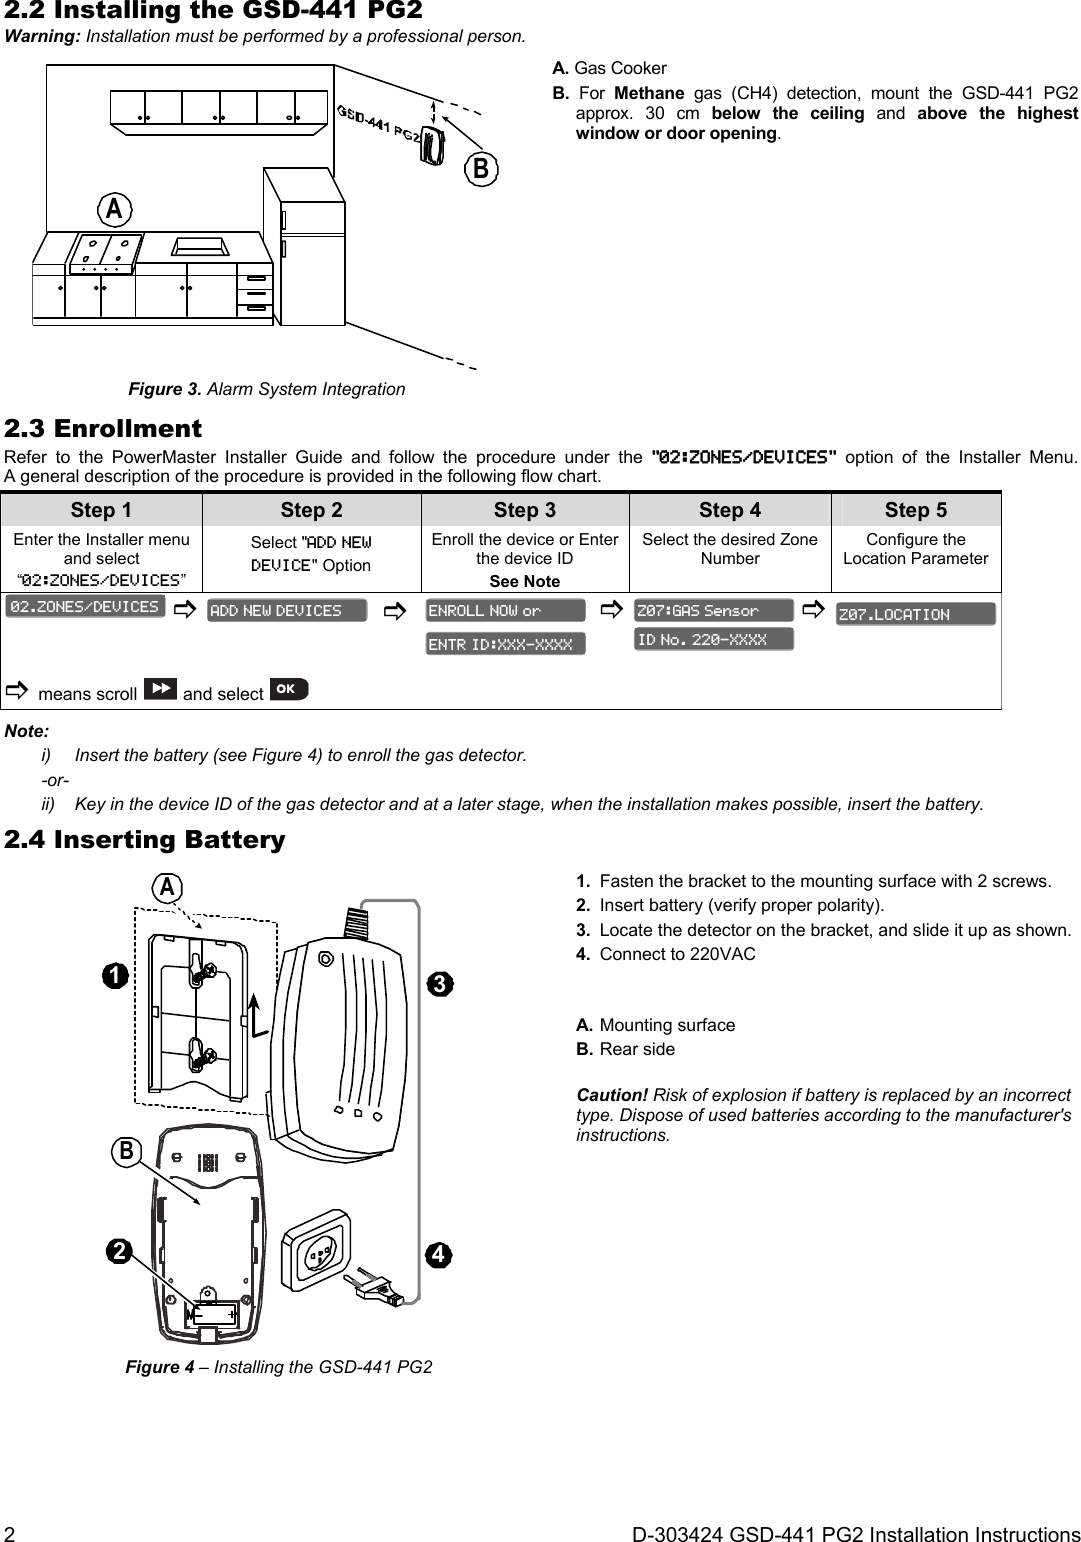 2  D-303424 GSD-441 PG2 Installation Instructions 2.2 Installing the GSD-441 PG2 Warning: Installation must be performed by a professional person. AB Figure 3. Alarm System Integration A. Gas Cooker B. For Methane gas (CH4) detection, mount the GSD-441 PG2 approx. 30 cm below the ceiling and above the highest window or door opening. 2.3 Enrollment Refer to the PowerMaster Installer Guide and follow the procedure under the &quot;02:ZONES/DEVICES&quot; option of the Installer Menu. A general description of the procedure is provided in the following flow chart. Step 1 Step 2 Step 3 Step 4    Step 5 Enter the Installer menu and select “02:ZONES/DEVICES” Select &quot;ADD NEW  DEVICE&quot; Option  Enroll the device or Enter the device ID See Note Select the desired Zone Number Configure the Location Parameter           means scroll  and select            Note: i)  Insert the battery (see Figure 4) to enroll the gas detector. -or- ii)  Key in the device ID of the gas detector and at a later stage, when the installation makes possible, insert the battery. 2.4 Inserting Battery 3142BA Figure 4 – Installing the GSD-441 PG2 1.  Fasten the bracket to the mounting surface with 2 screws. 2.  Insert battery (verify proper polarity). 3.  Locate the detector on the bracket, and slide it up as shown. 4.  Connect to 220VAC A. Mounting surface B. Rear side Caution! Risk of explosion if battery is replaced by an incorrect type. Dispose of used batteries according to the manufacturer&apos;s instructions. Z07.LOCATION ID No. 220-XXXX Z07:GAS Sensor ENTR ID:XXX-XXXX ENROLL NOW or ADD NEW DEVICES 02.ZONES/DEVICES 